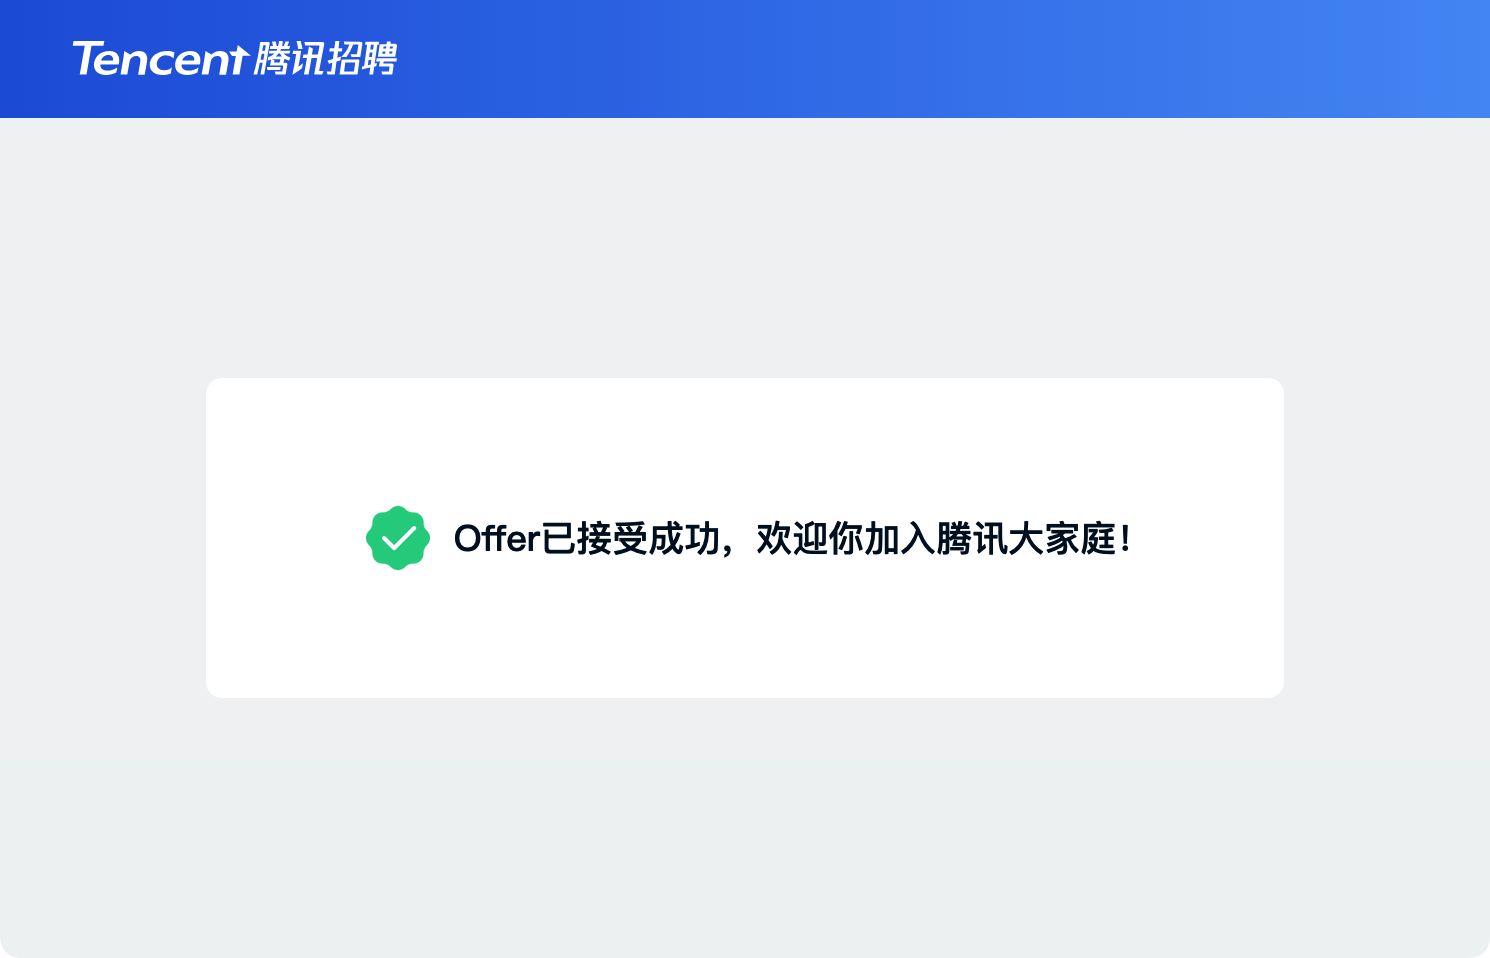 tencent-offer-accepted